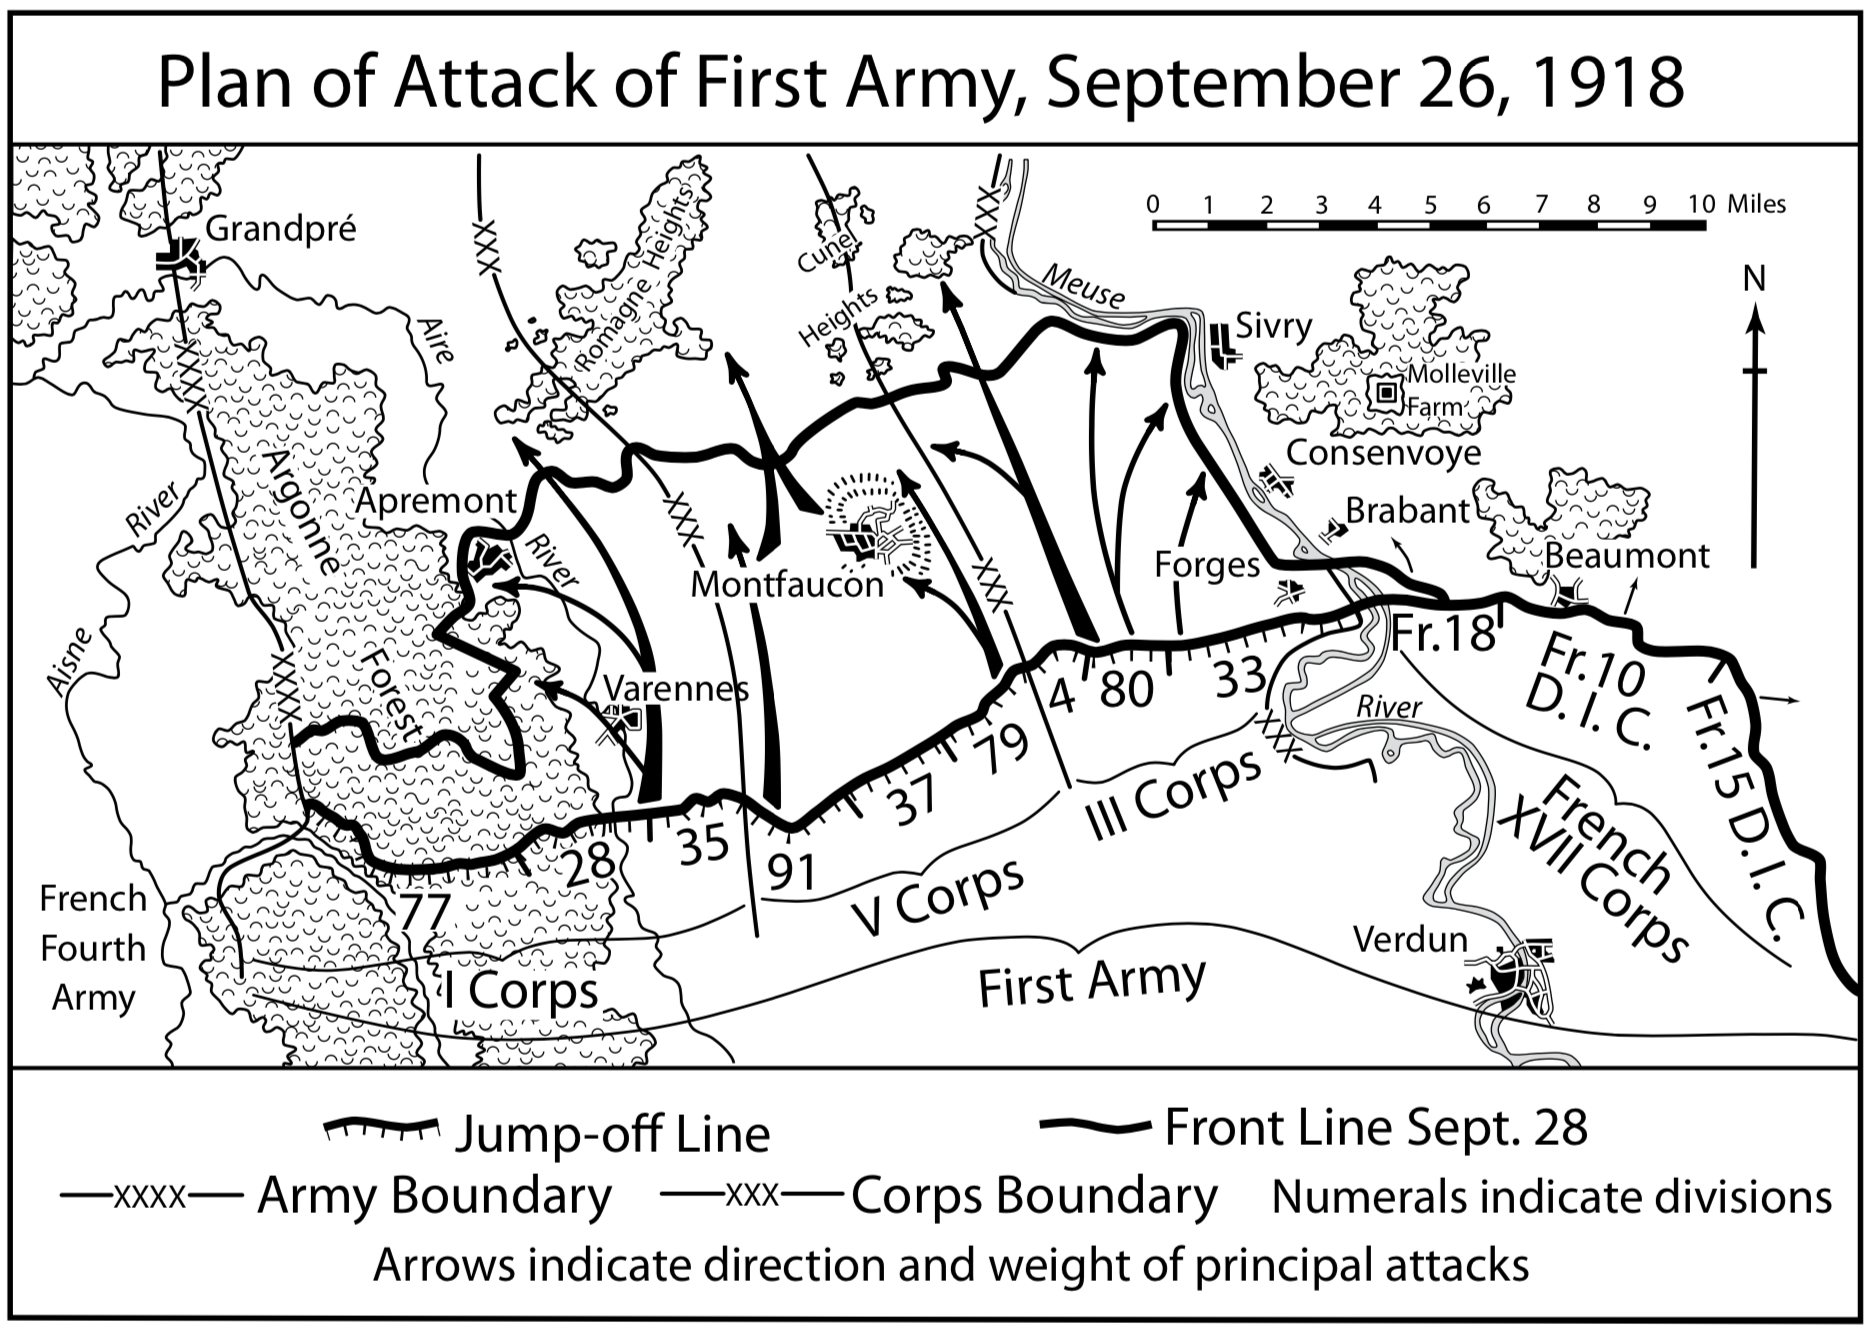 Plan of the Attack Sept 26th